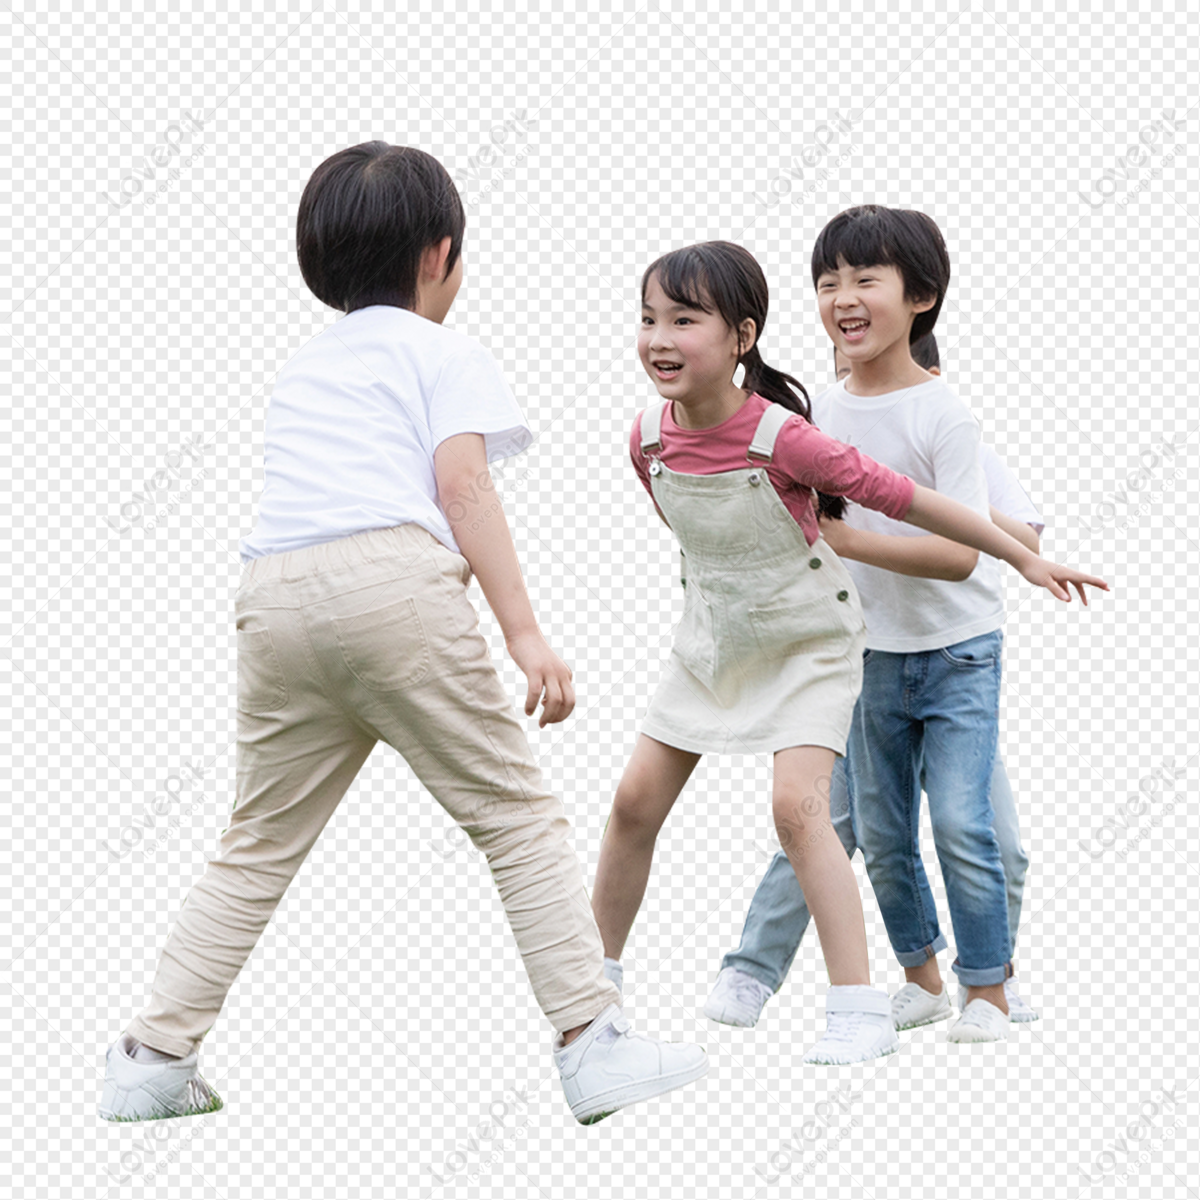 children-playing-png-images-with-transparent-background-free-download